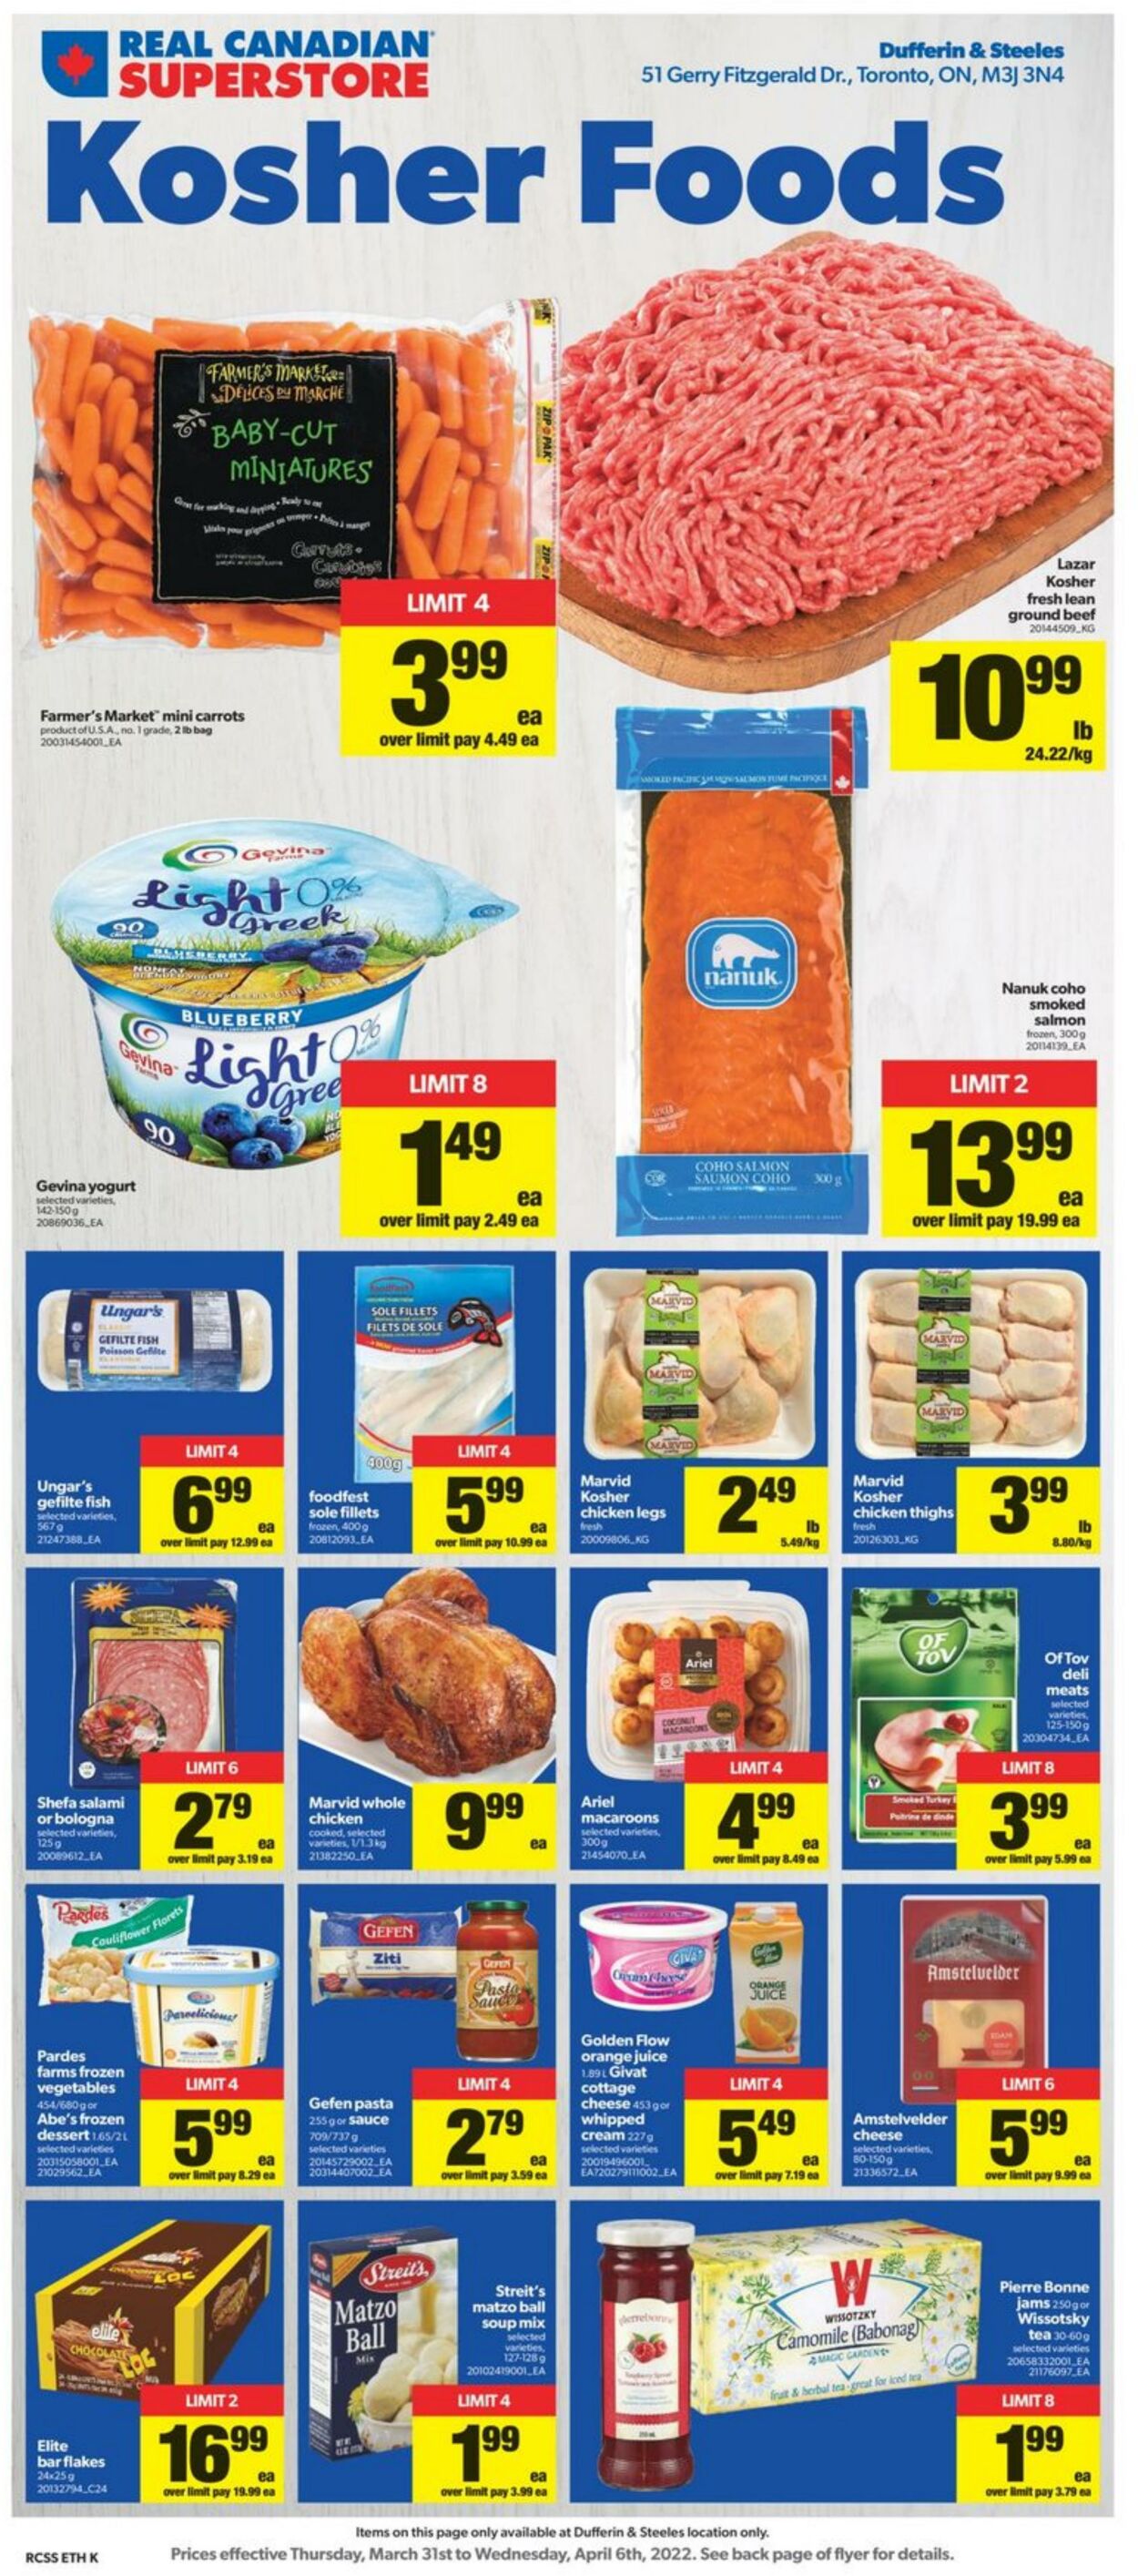 Flyer Real Canadian Superstore 31.03.2022 - 06.04.2022